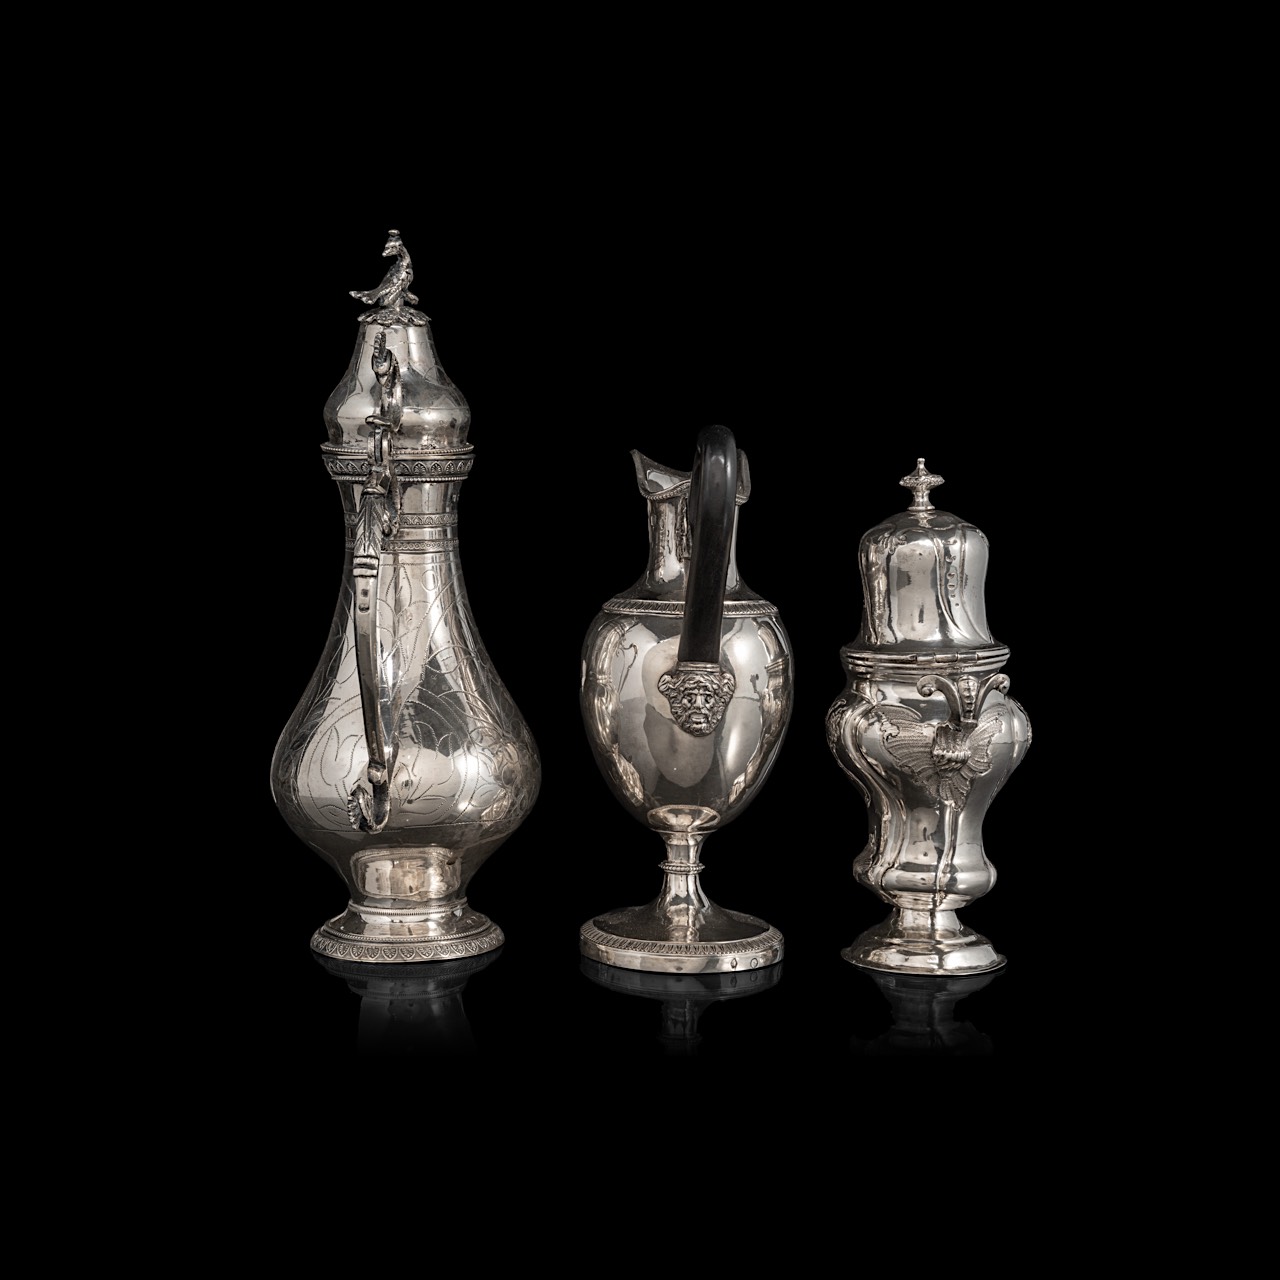 A various collection of silver objects, total weight ca 895 g, H 16,5 - 24 cm - Image 5 of 11